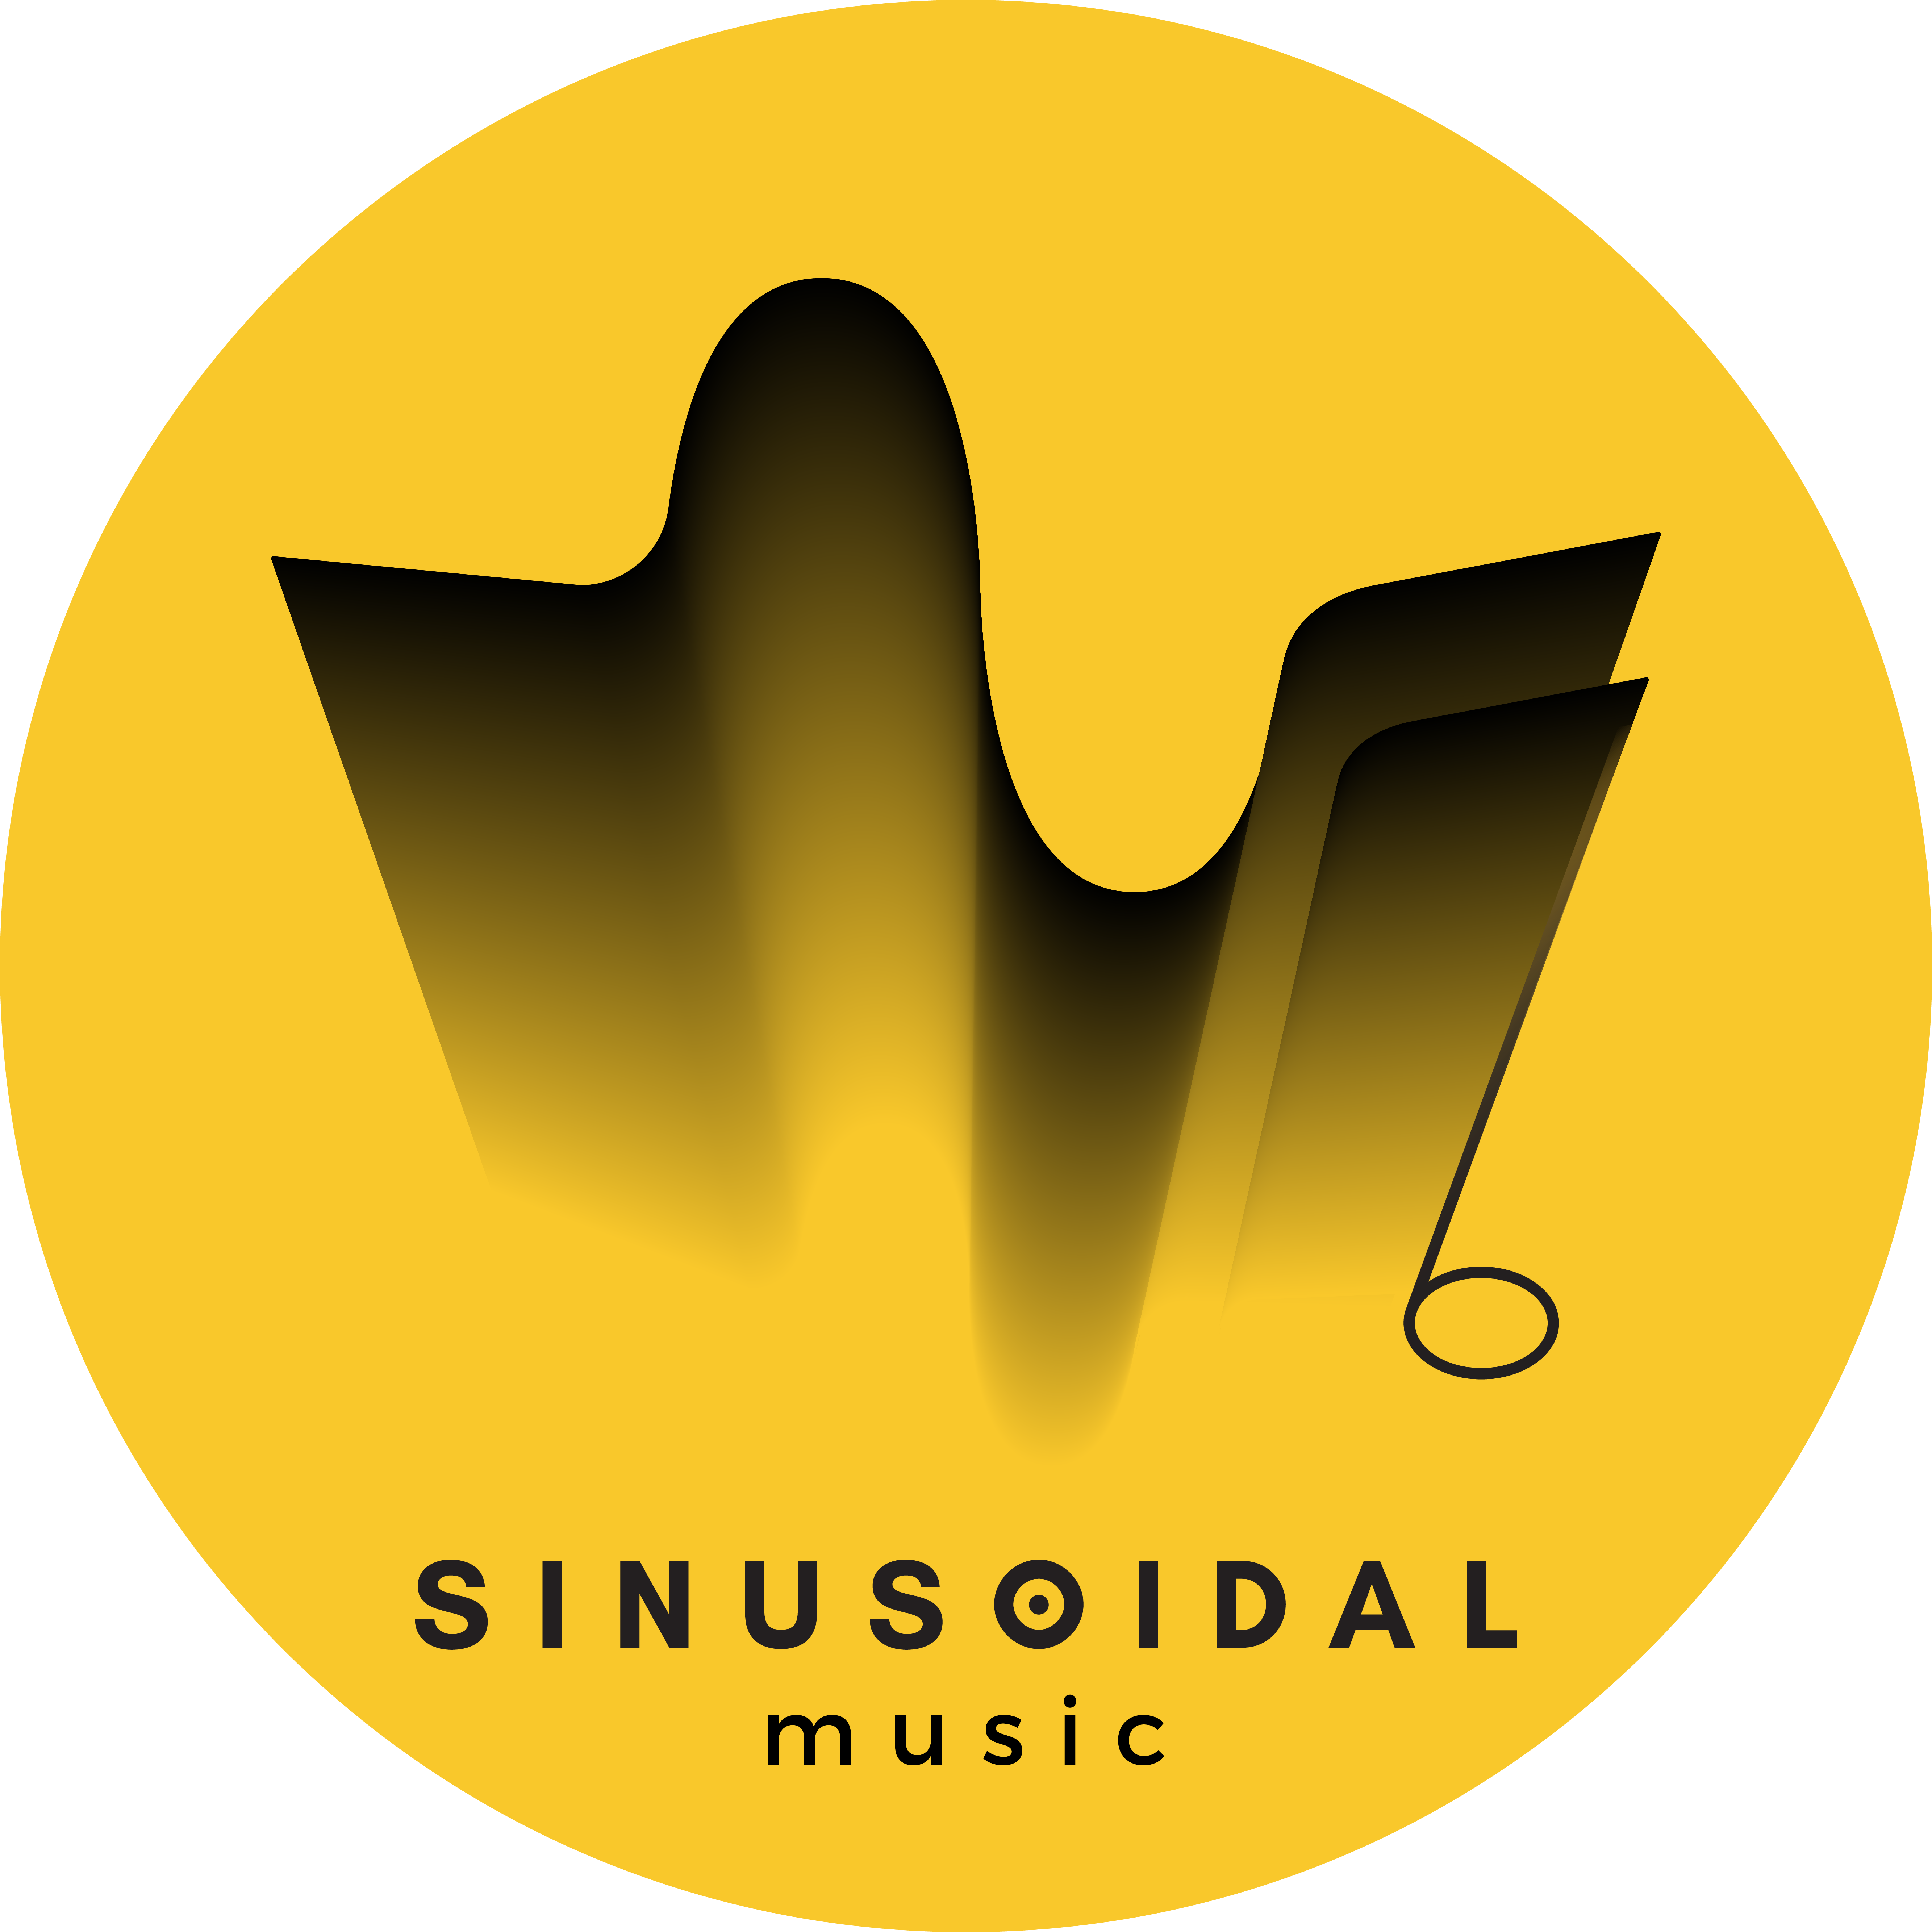 Sinusoidal Music review of Stockholm Syndrome by Chris Caulfield